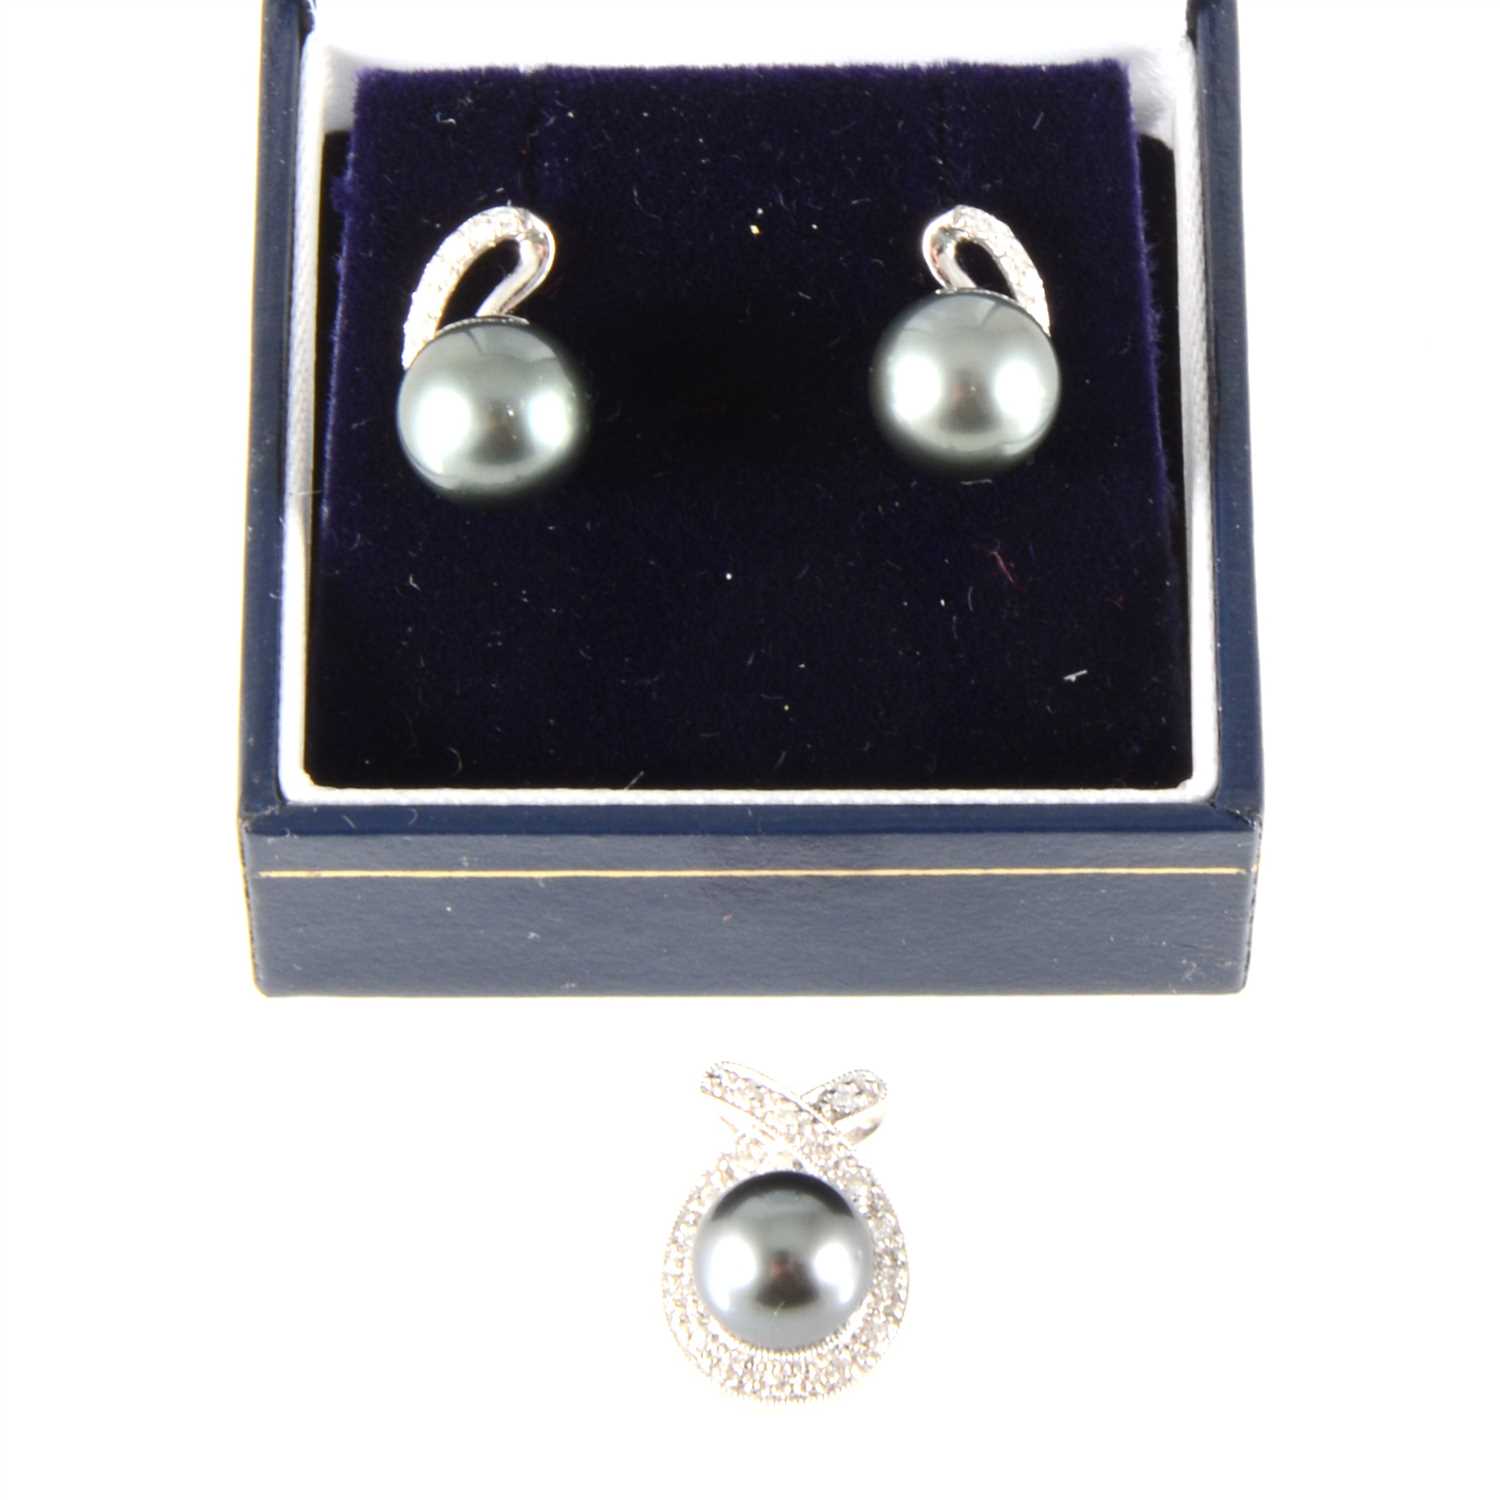 Lot 185 - A Japanese Akoya pearl and diamond pendant and a pair of Tahitian and diamond drop earrings.